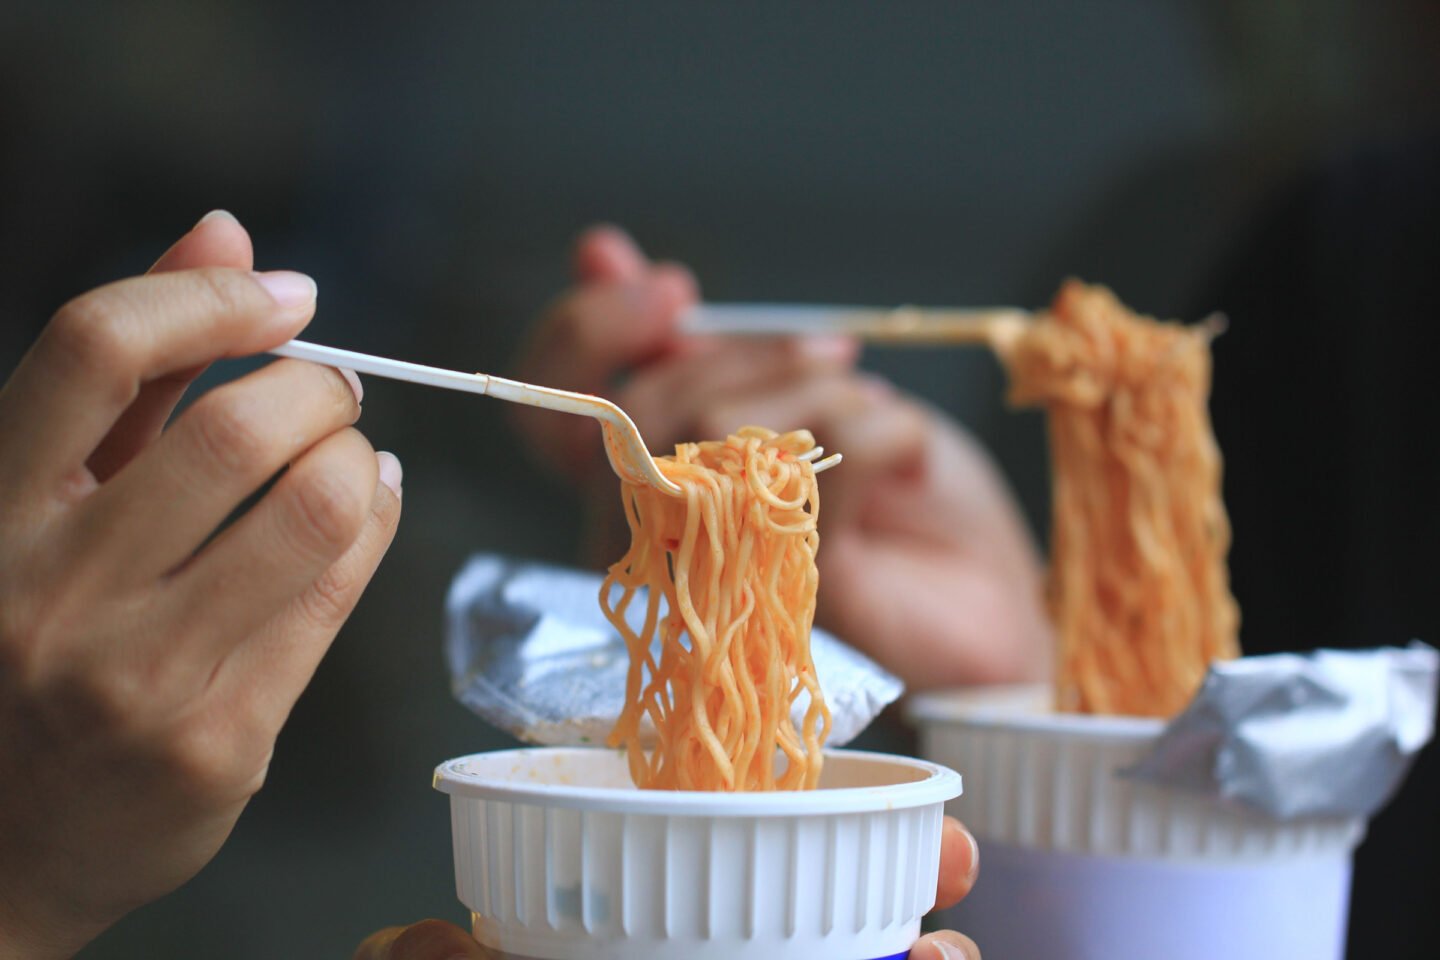 women eating instant noodles in cups